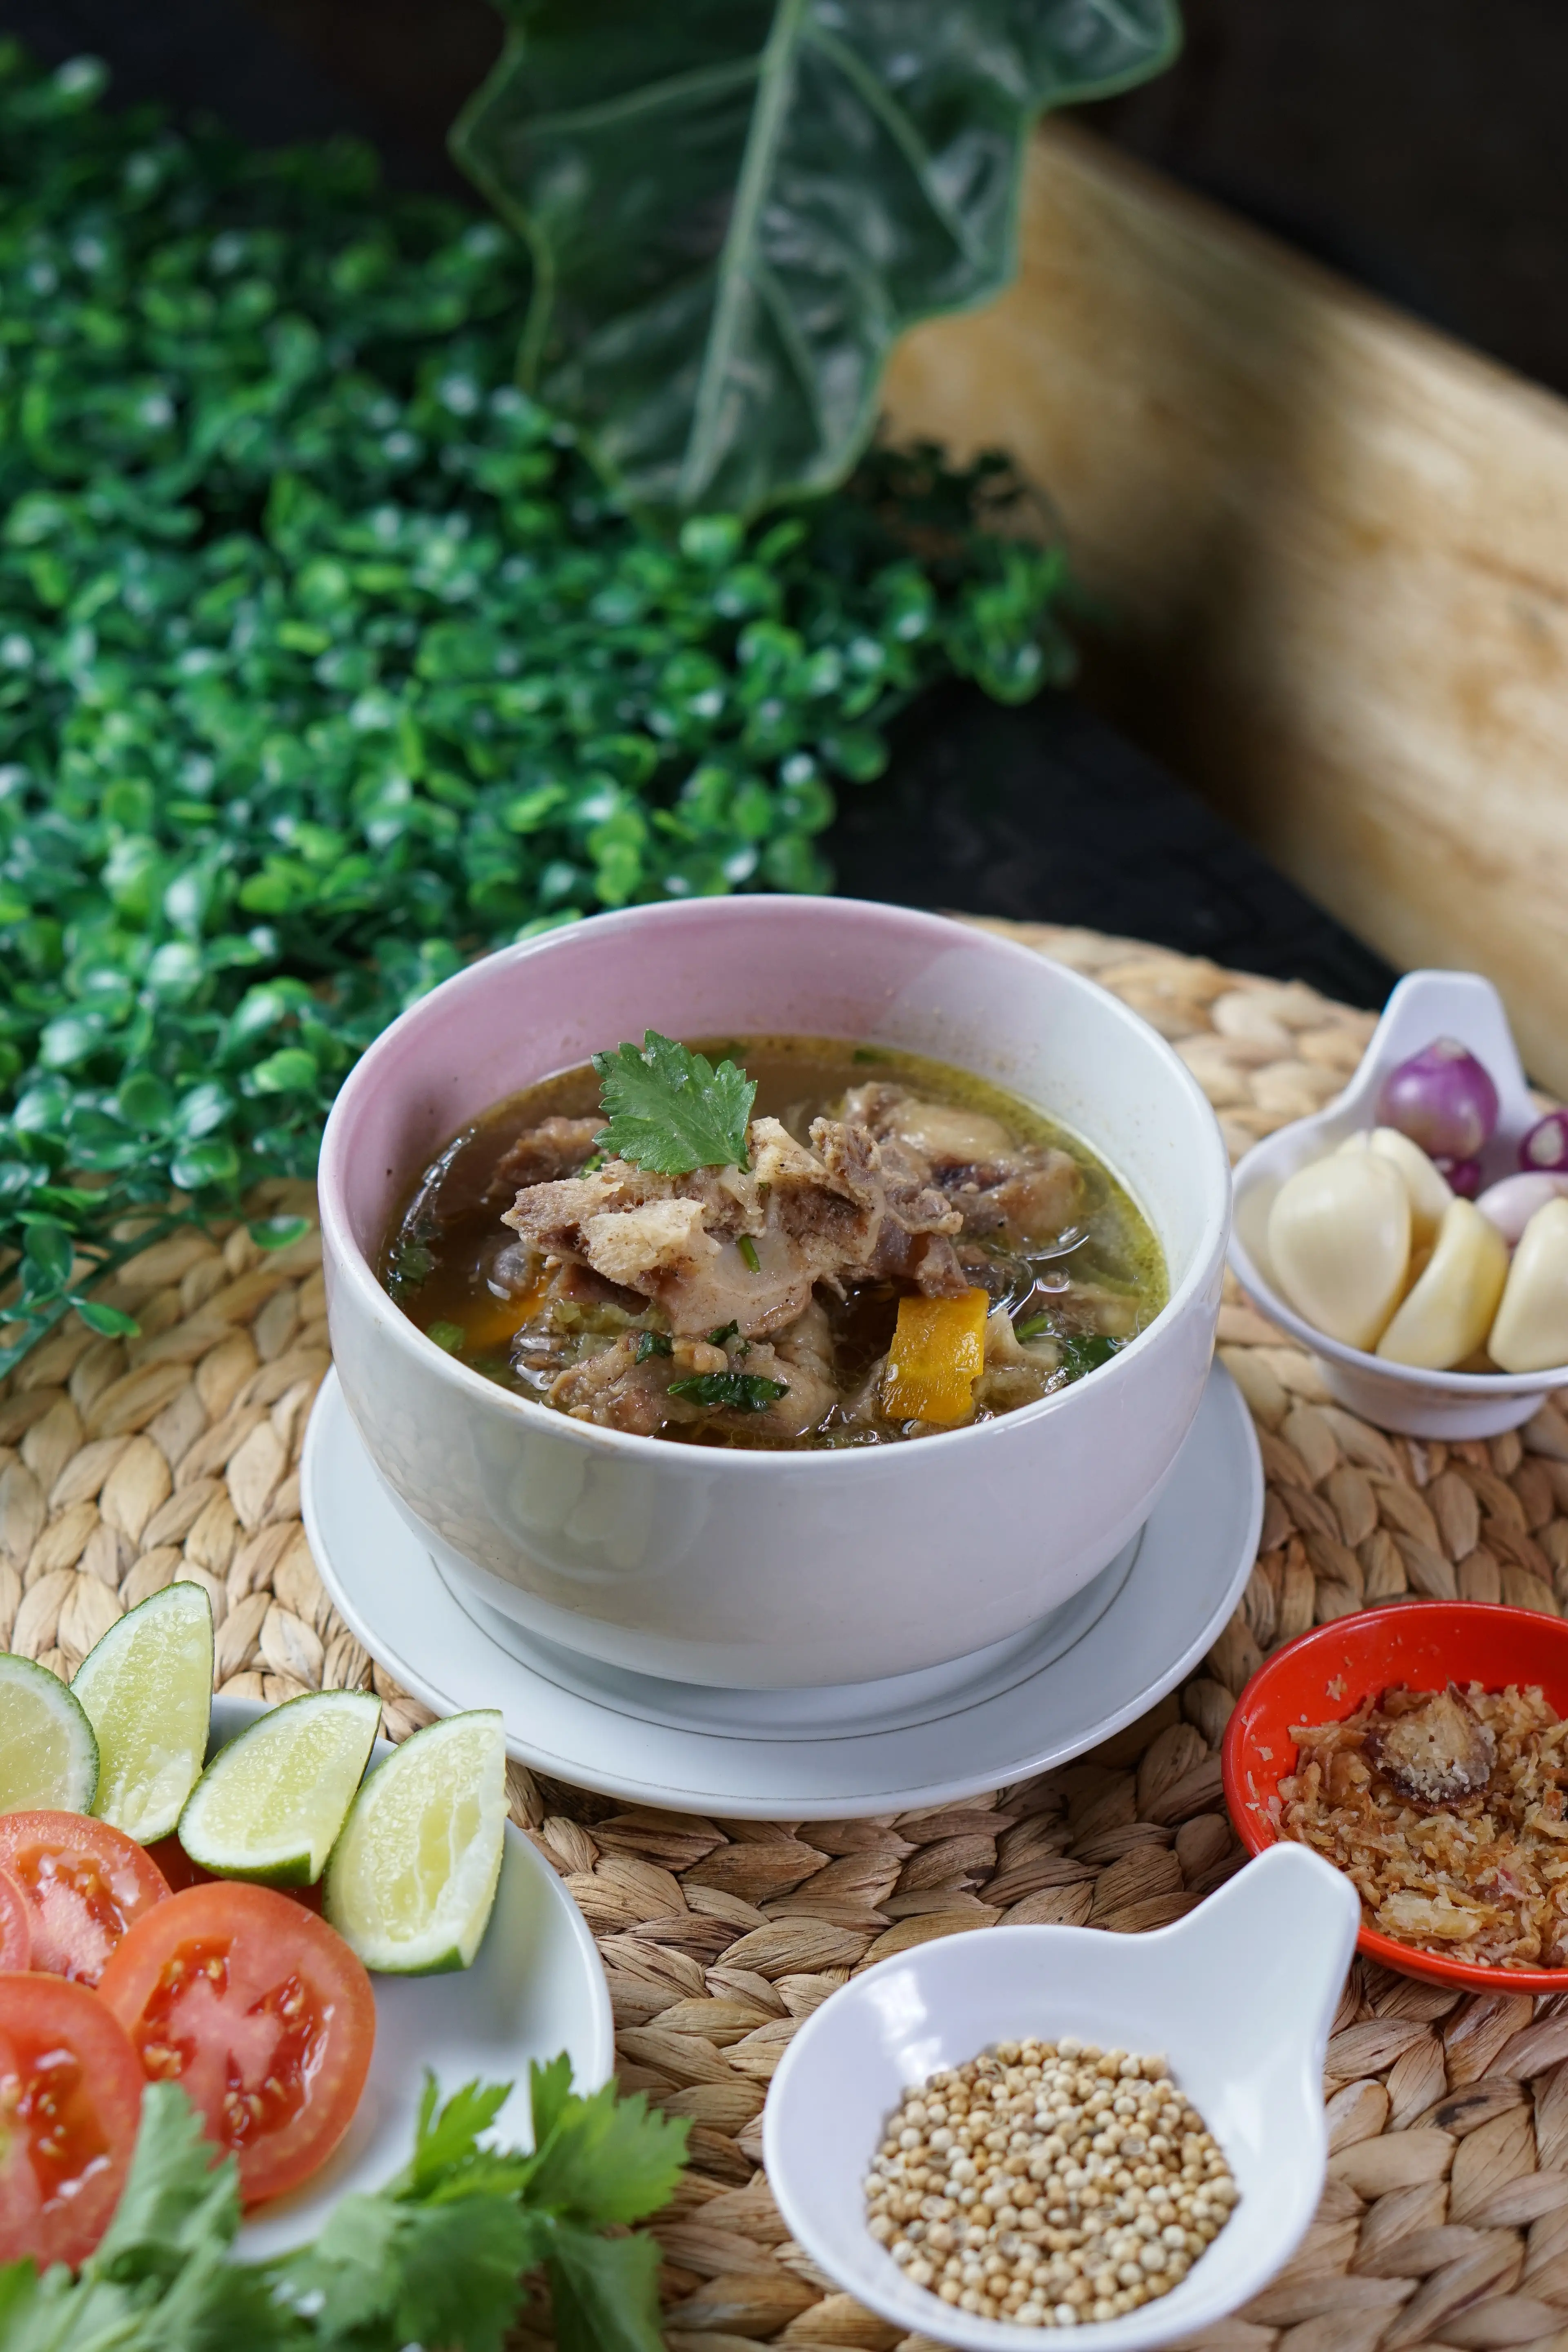 Tender Mutton Soup garnished with Cilantro